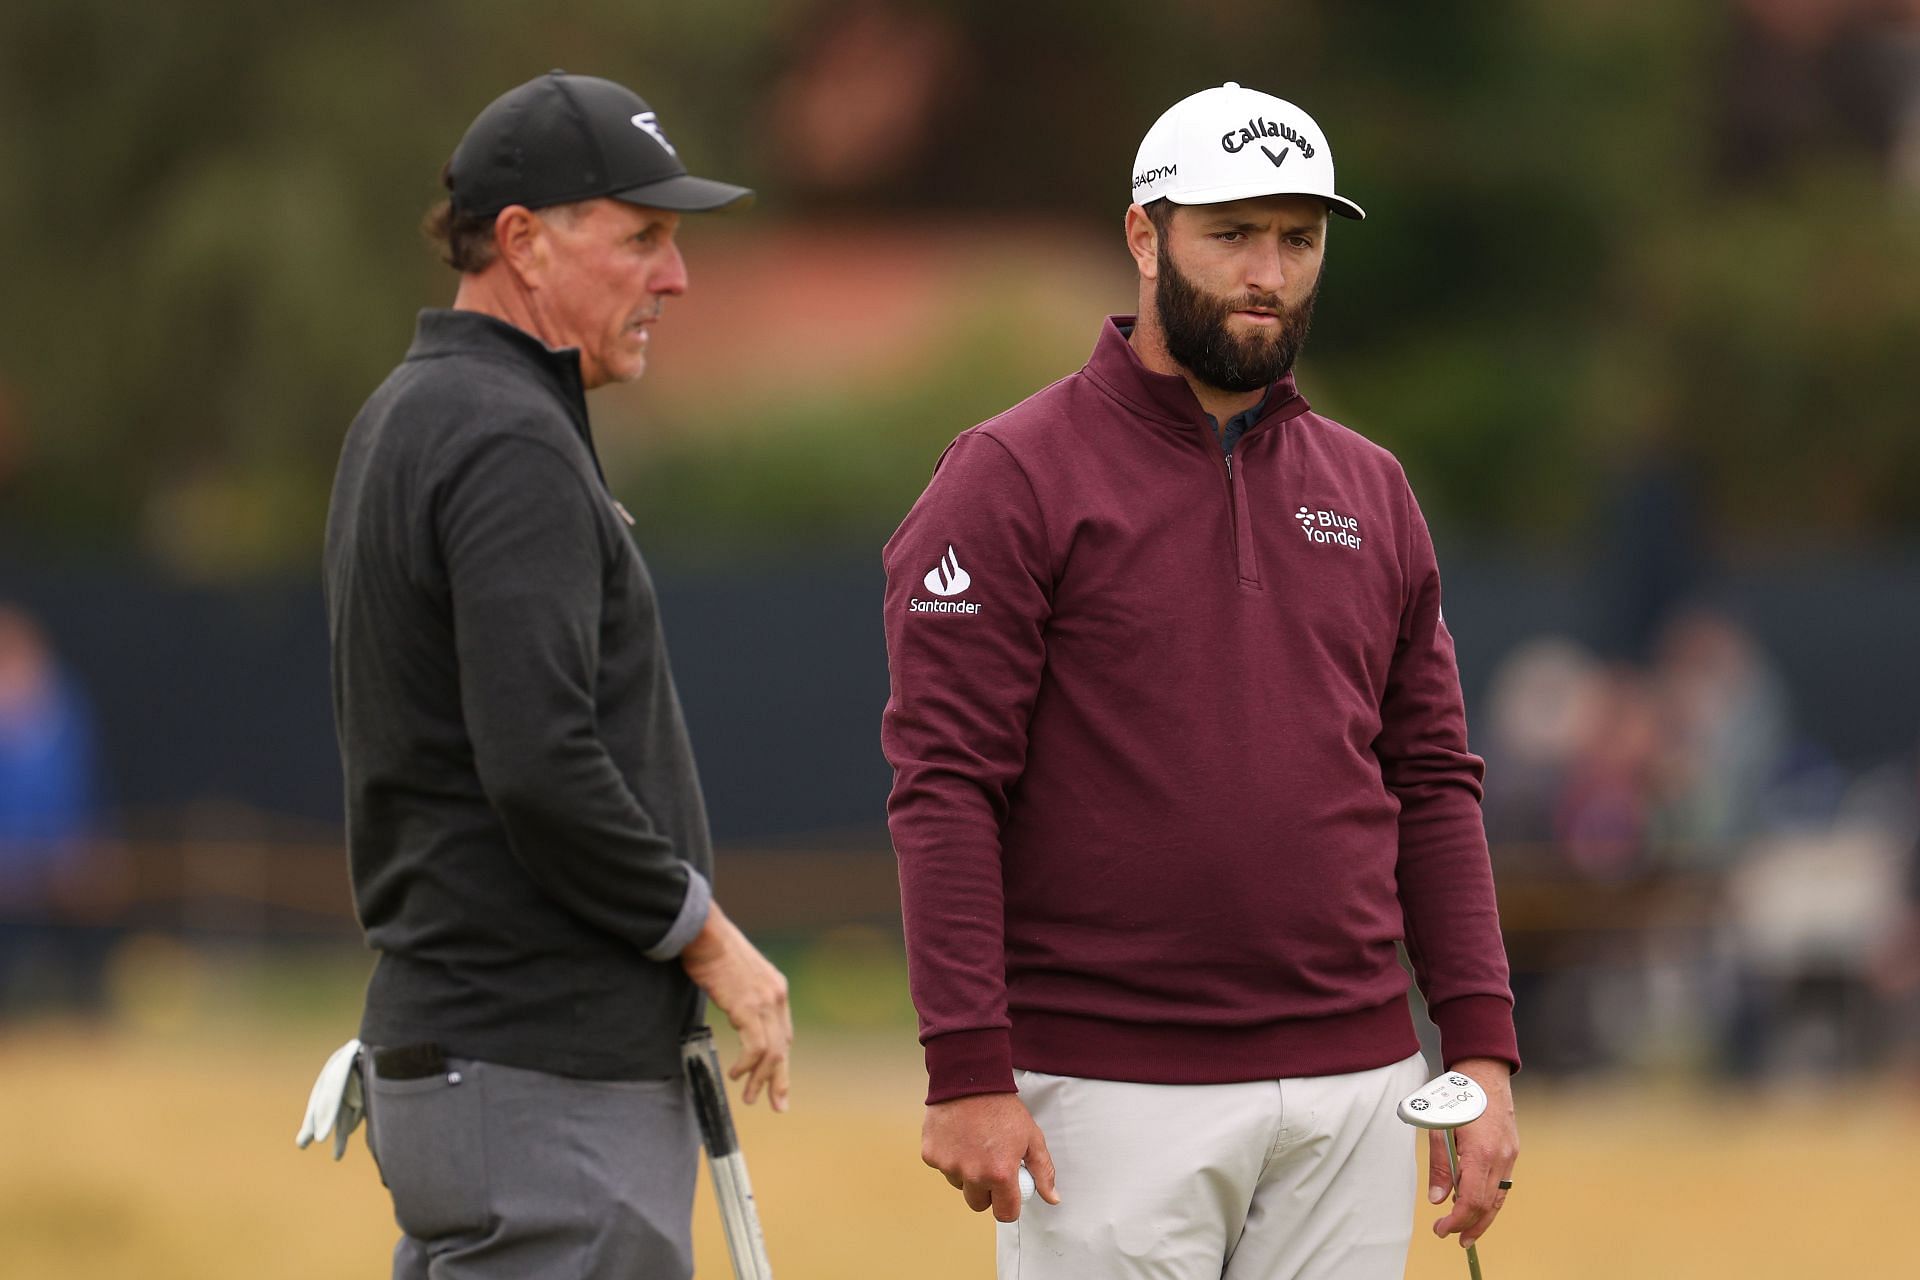 What does this mean for Jon Rahm and Phil Mickelson?